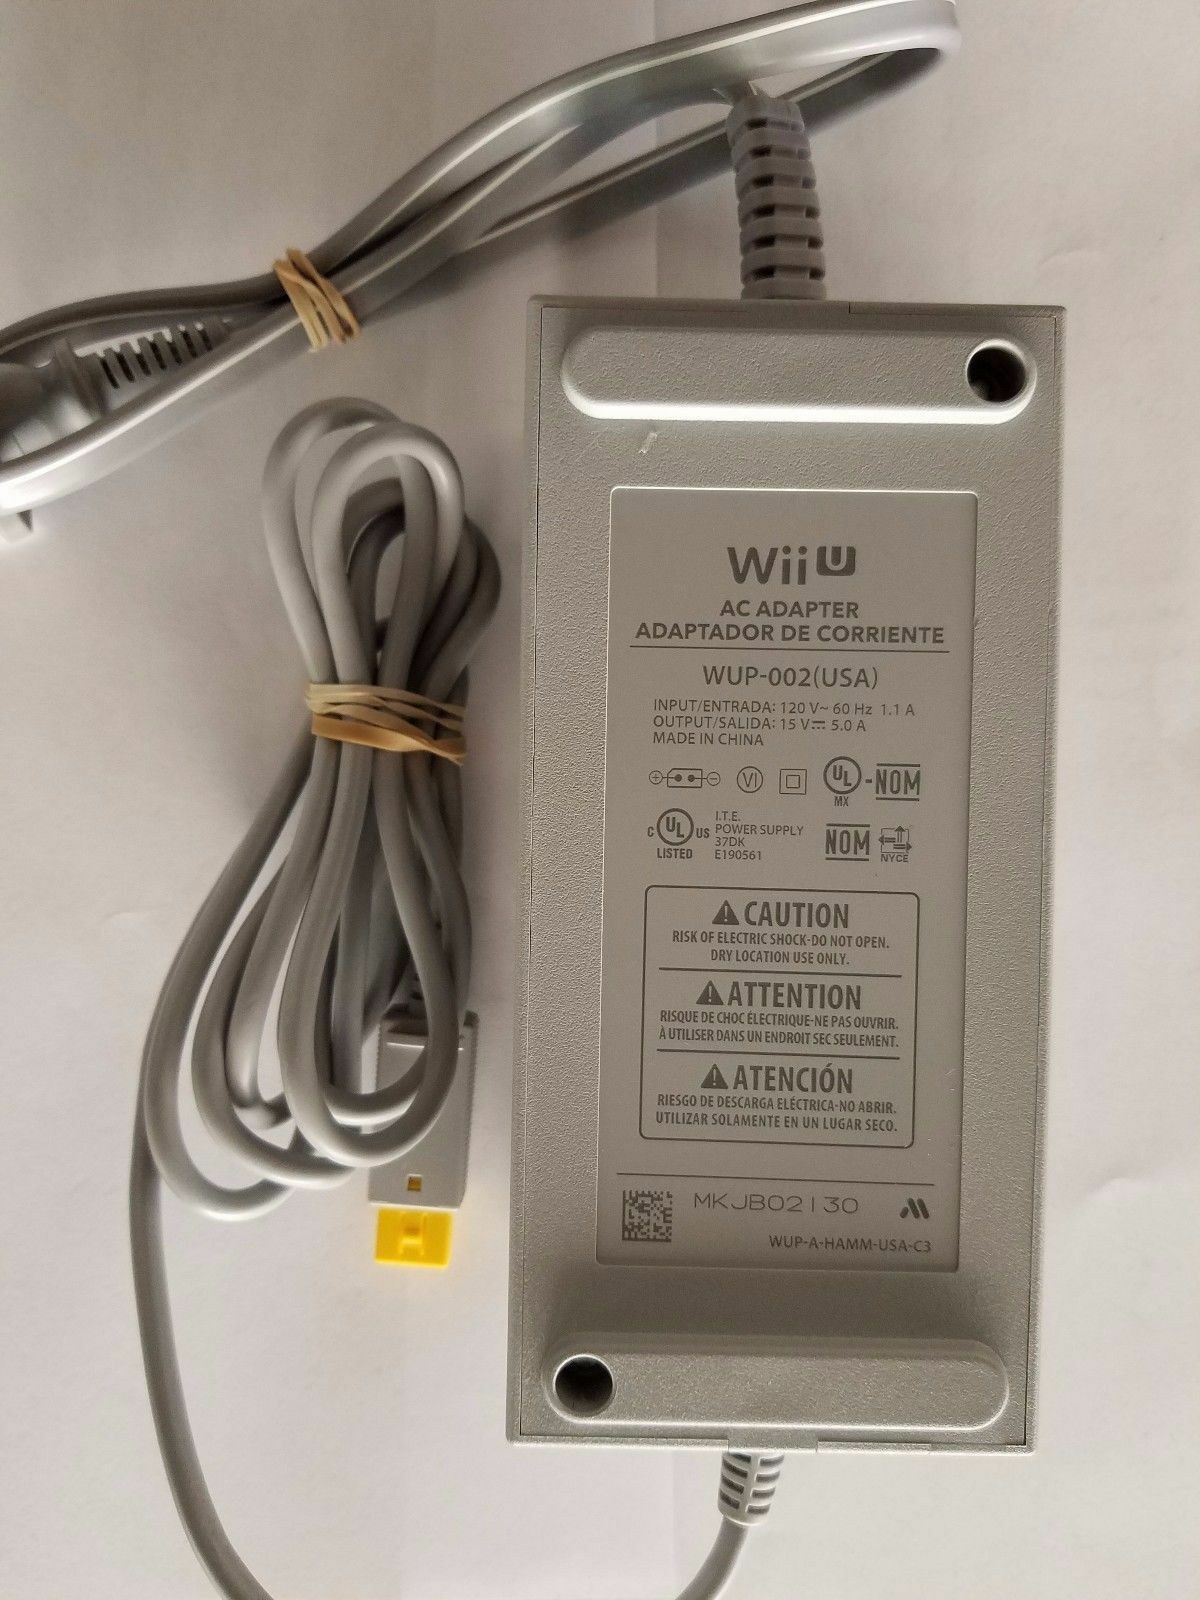 NEW 15V 5A Wii U CONSOLE WUP-002 AC POWER ADAPTER - Click Image to Close